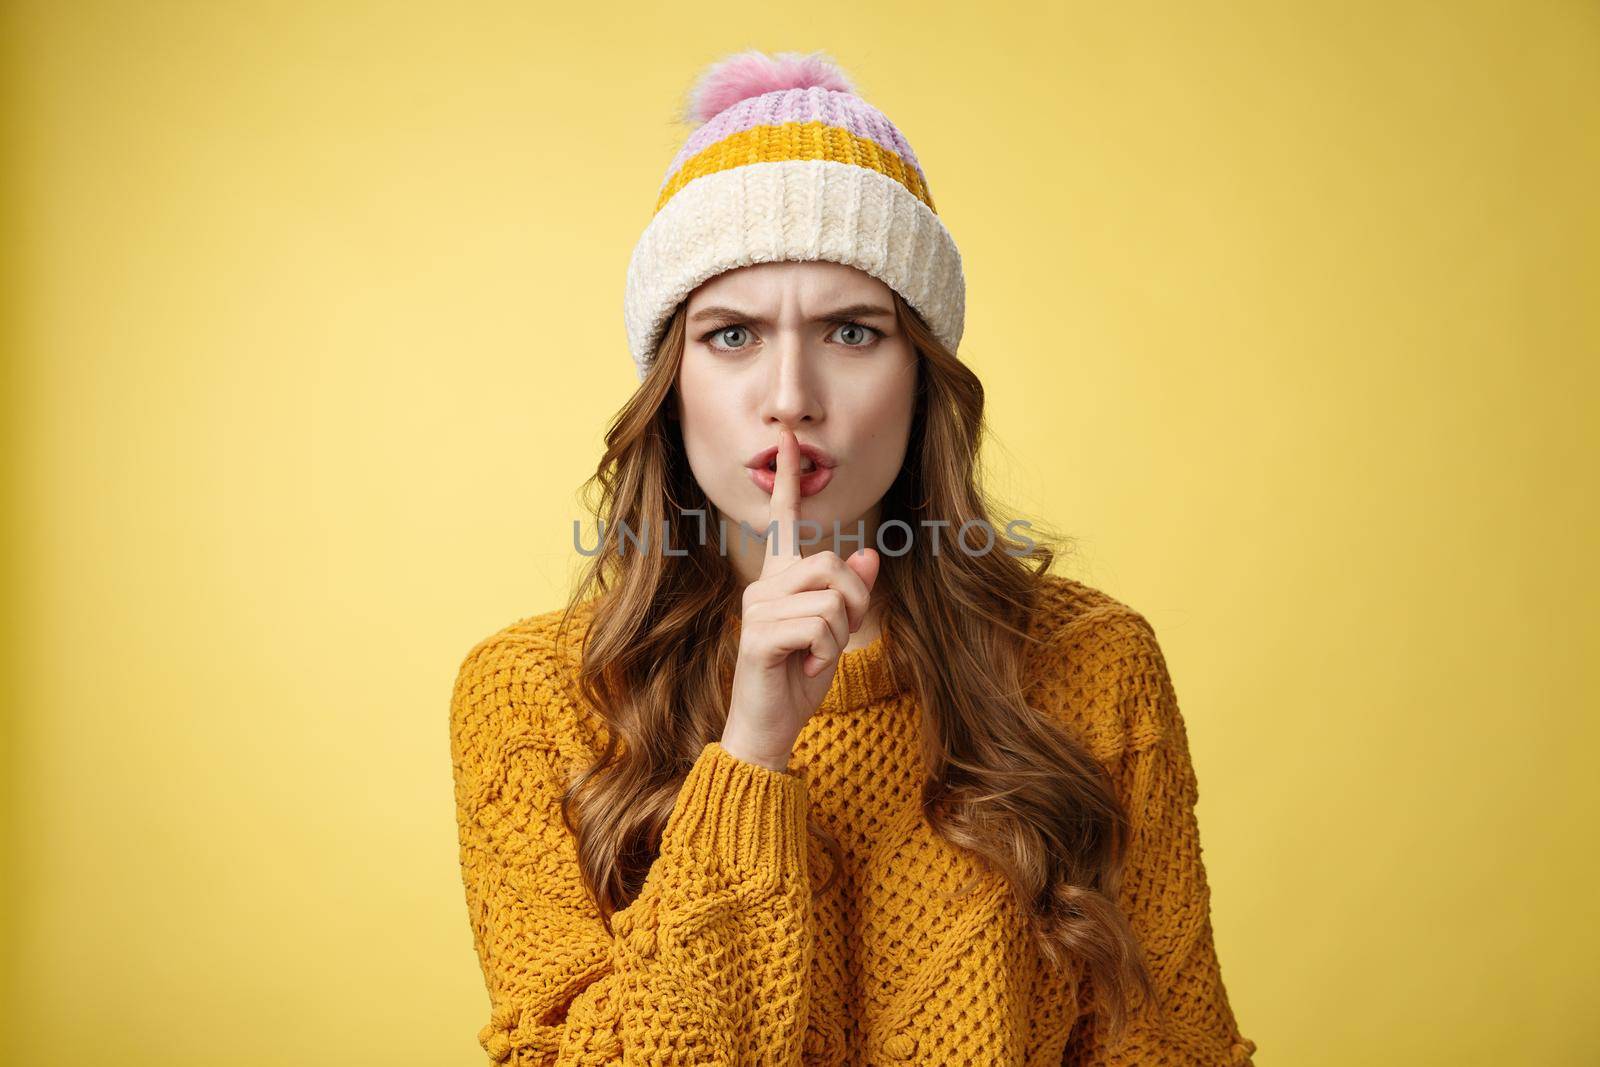 Furious angry annoyed cute woman shushing you irritated loud talk during important meeting frowning cringing pissed showing shhh gesture index finger pressed mouth, yellow background.